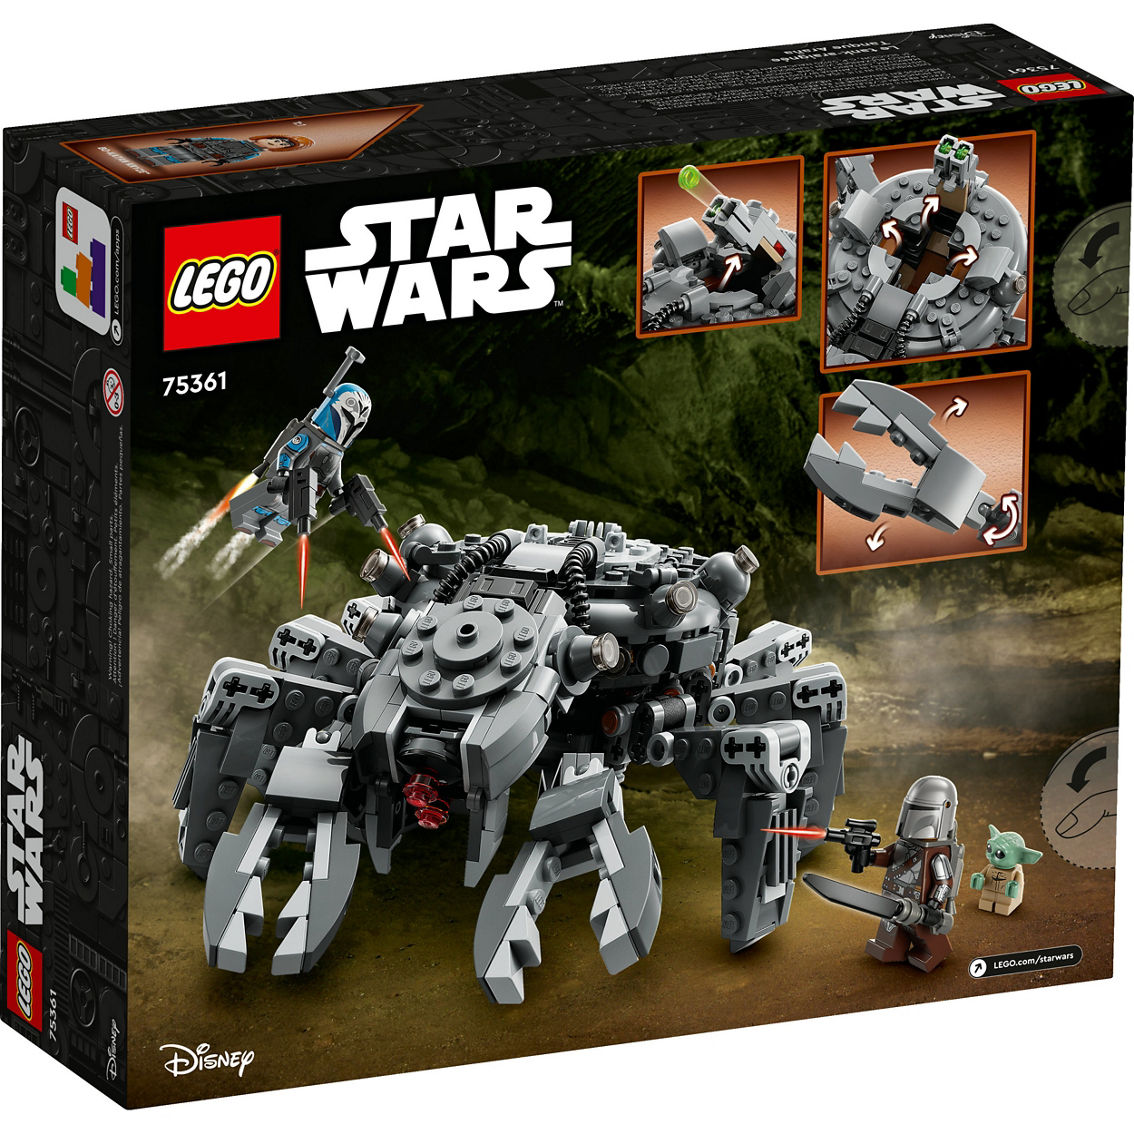 LEGO Star Wars: The Mandalorian Spider Tank Building Toy Set 75361 - Image 2 of 10